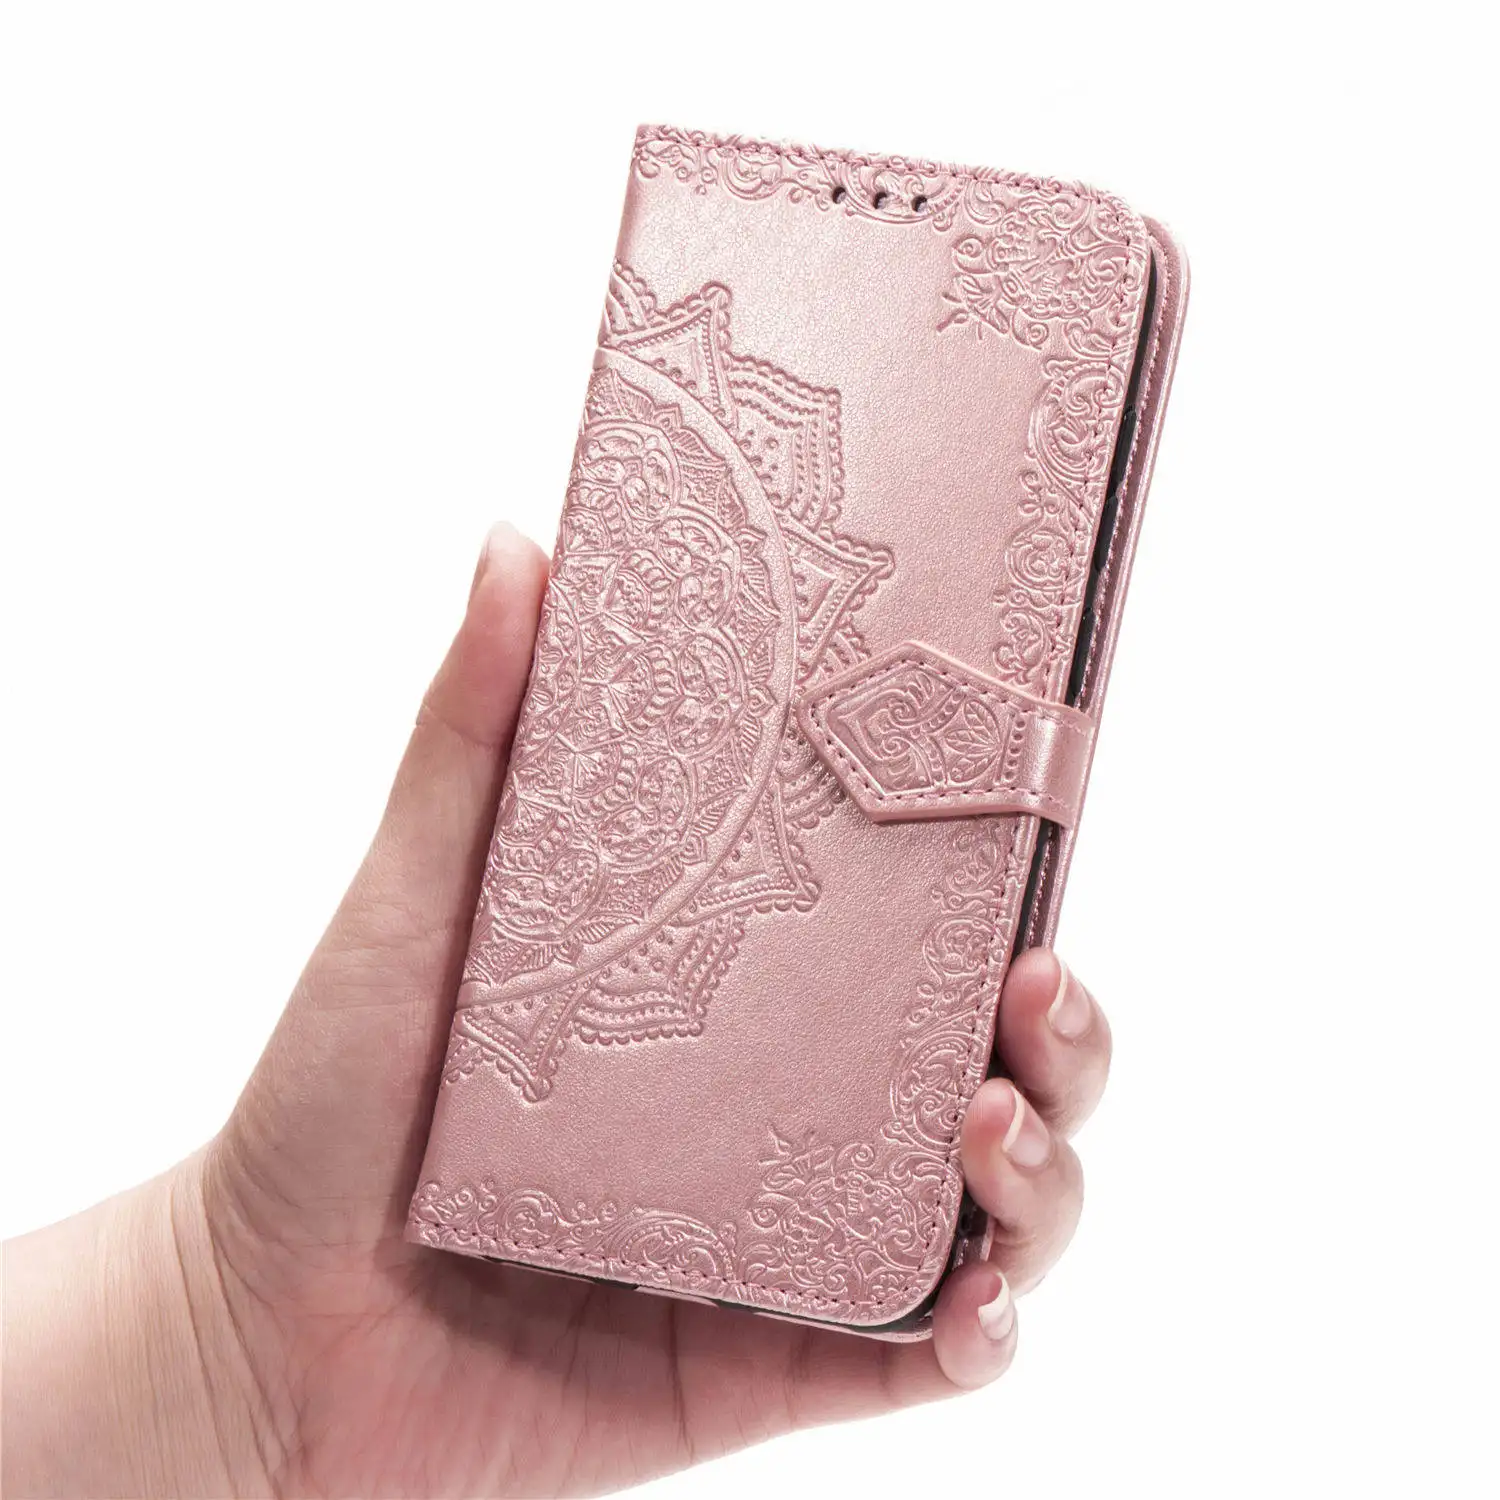 Mandala embossed Wallet leather case cases For NOKIA 6.2 7.2 X7 8.1 3.2 3.1 5.1 7.1 7 9 pure view Plus Coque Back Cover A2901